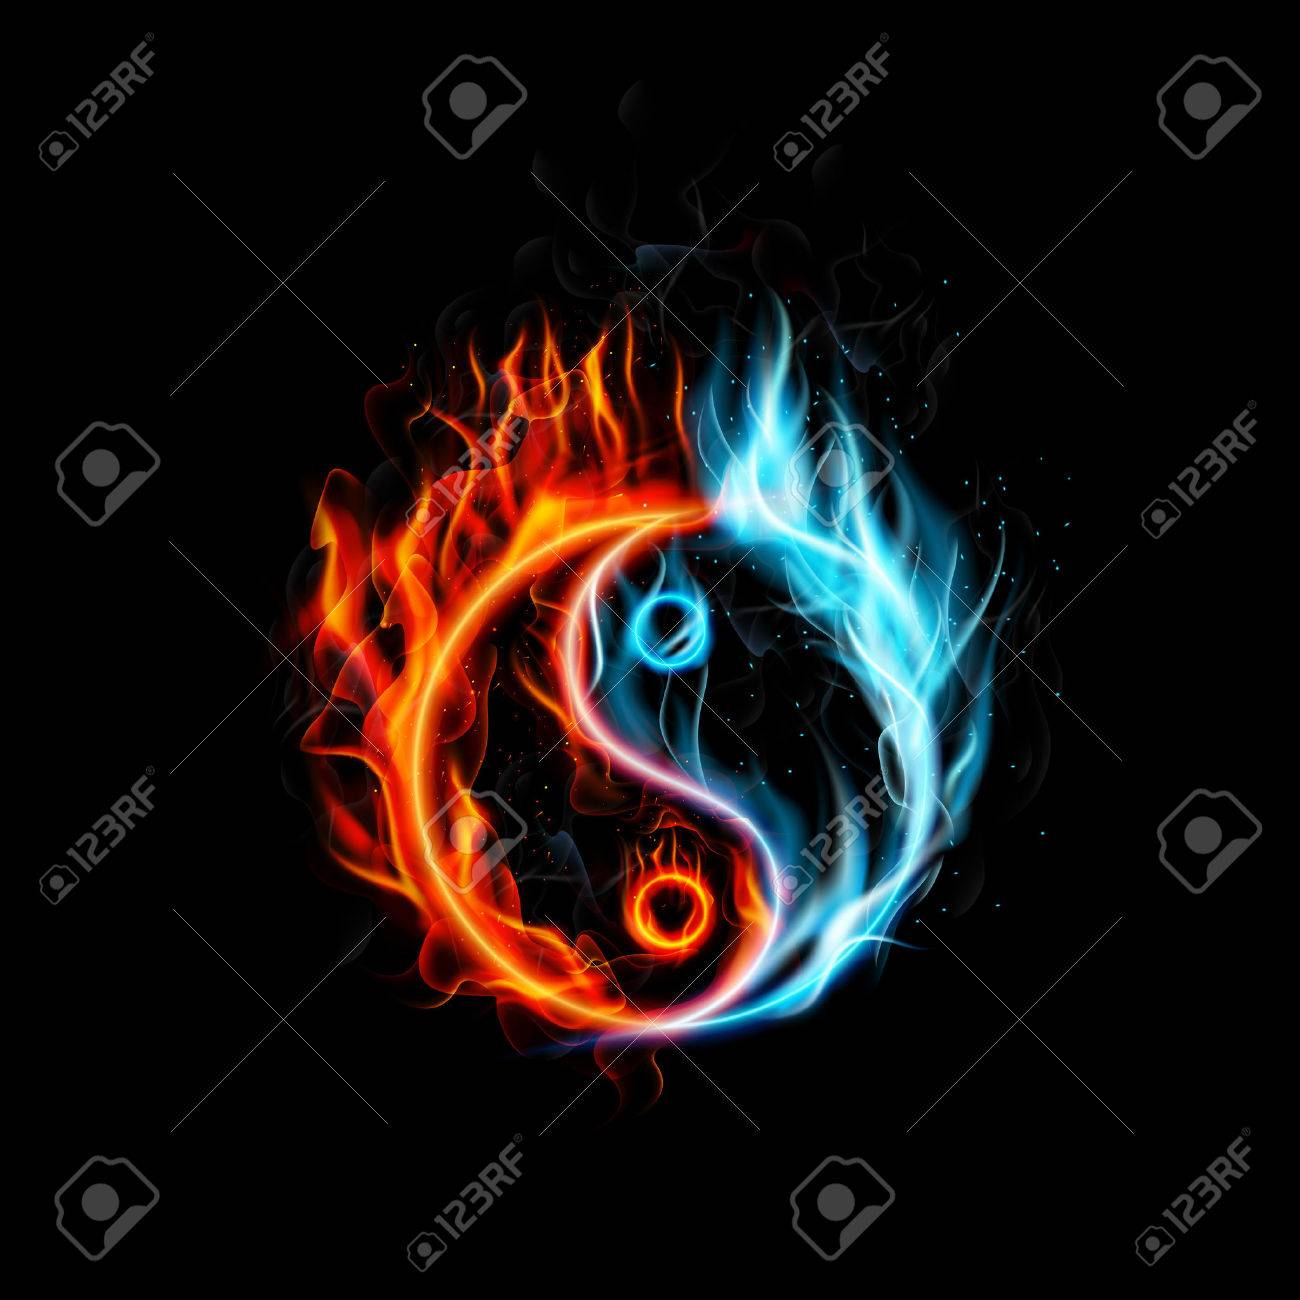 Fire Burning Yin Yang With Black Background Stock Photo Picture